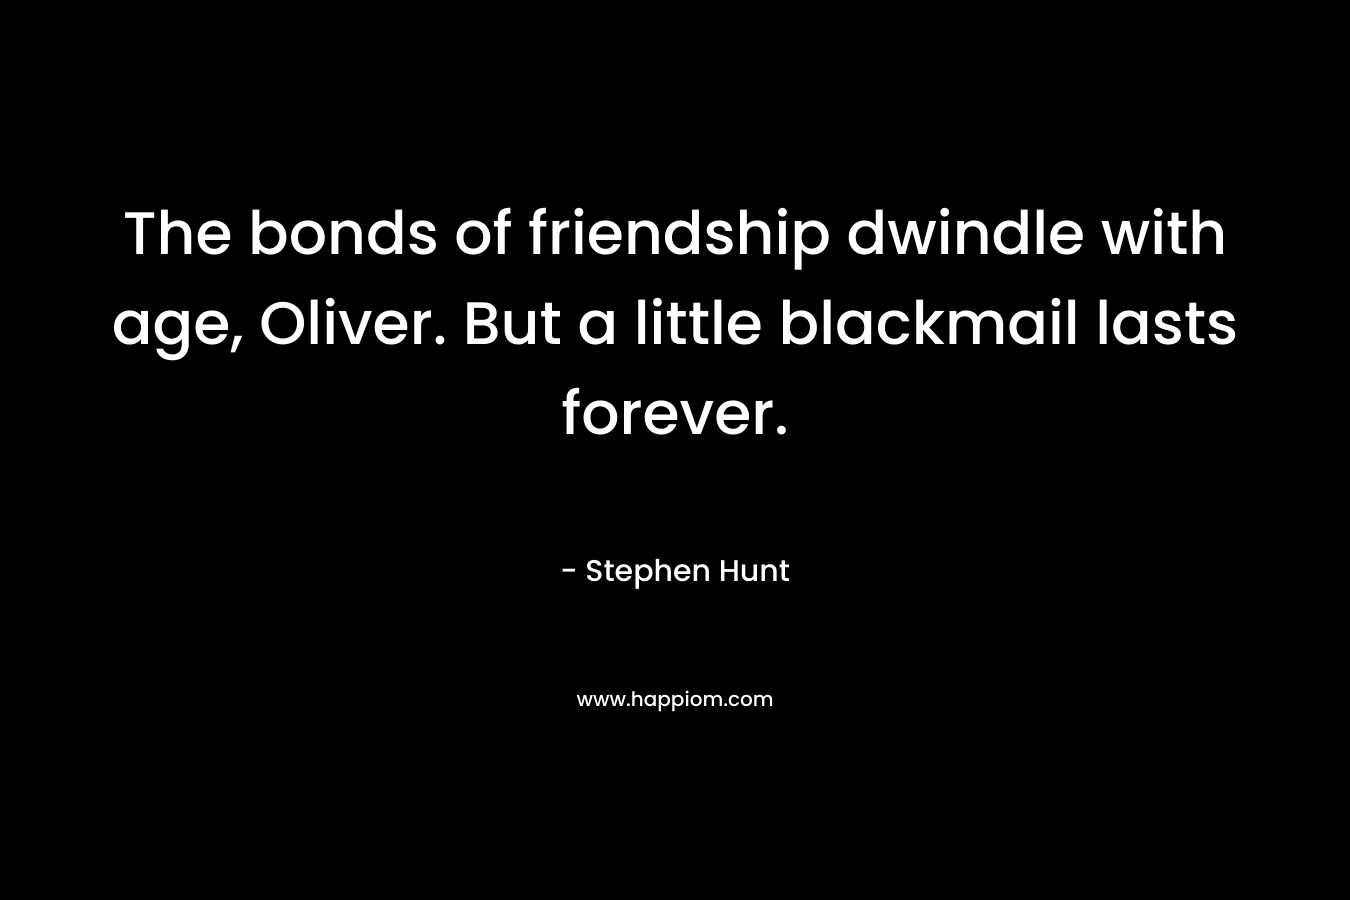 The bonds of friendship dwindle with age, Oliver. But a little blackmail lasts forever. – Stephen Hunt